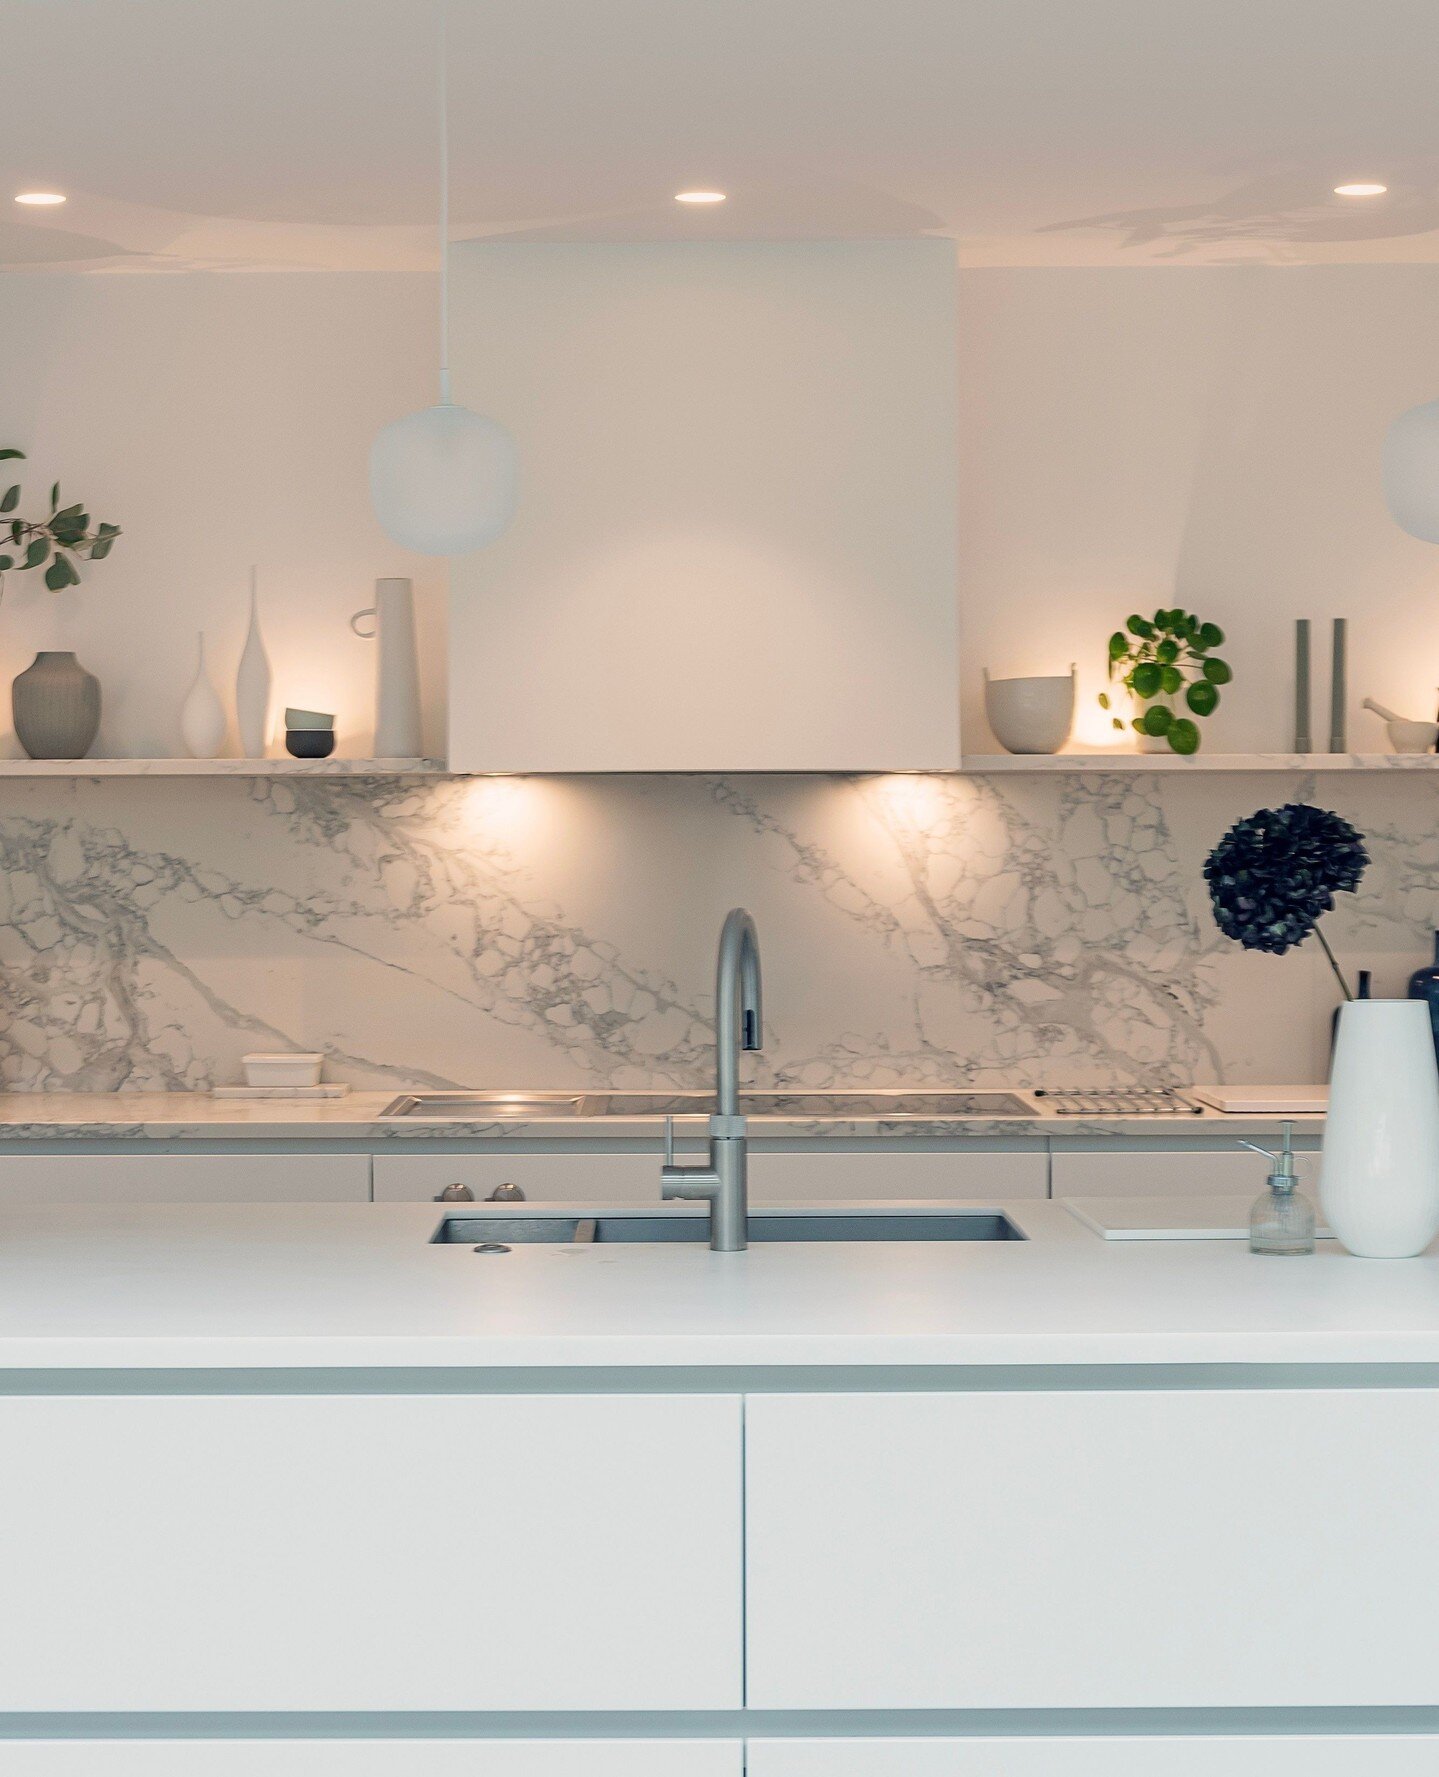 This beautiful marbled quartz combined with calming white tones and soft lighting, creates a warm, serene ambience within this expansive open-plan space.⁠
⁠
Go to our link in bio to discover more photos of this stylish kitchen. ⁠
⁠
Designer: @ashley_